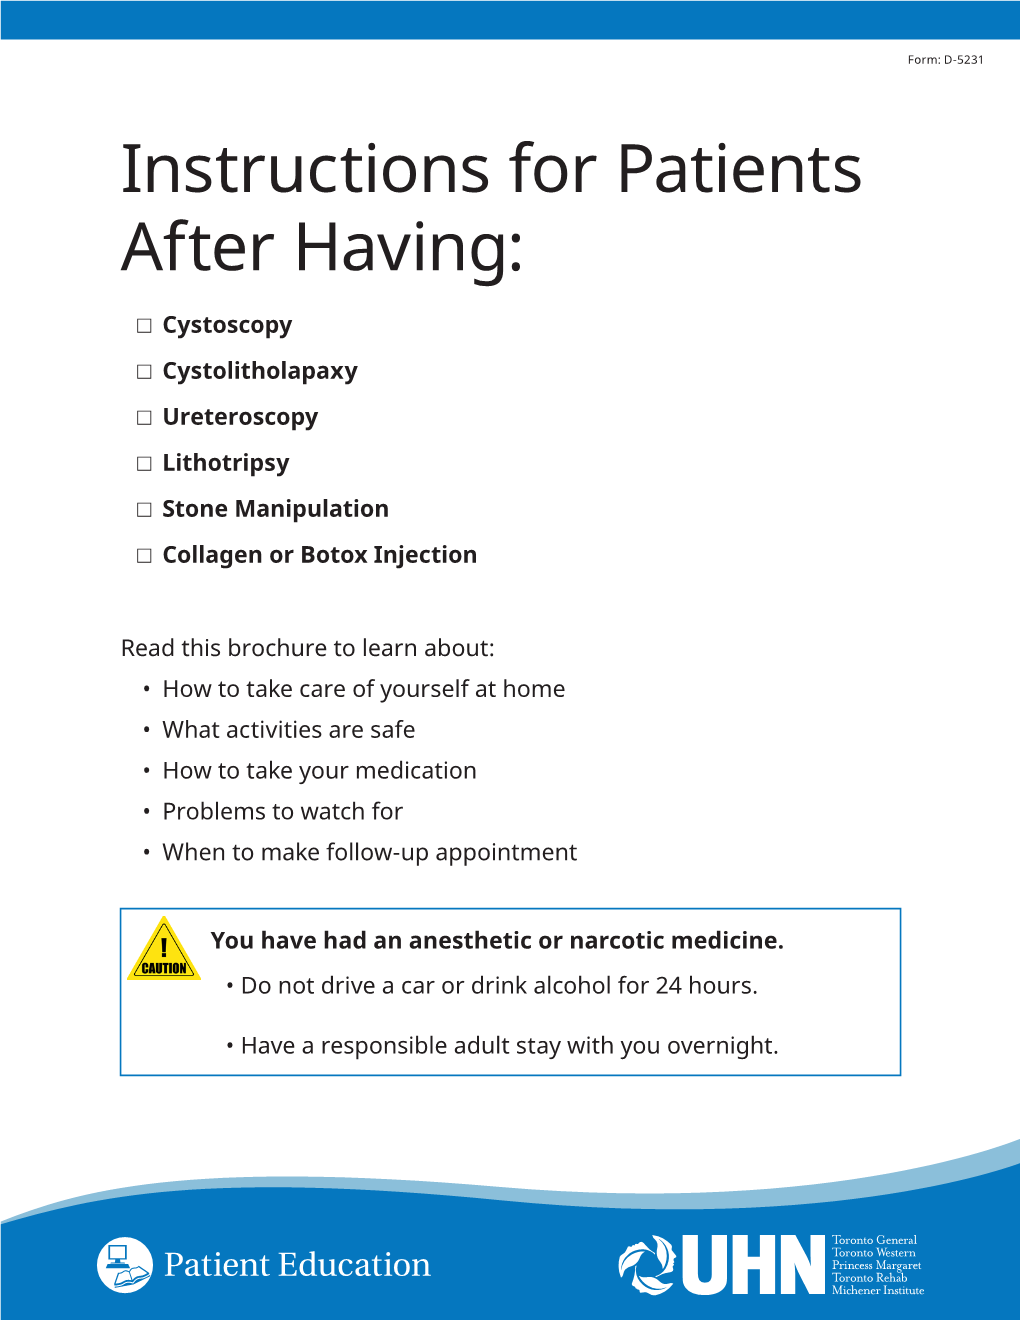 Instructions for Patients After Having: Cystoscopy